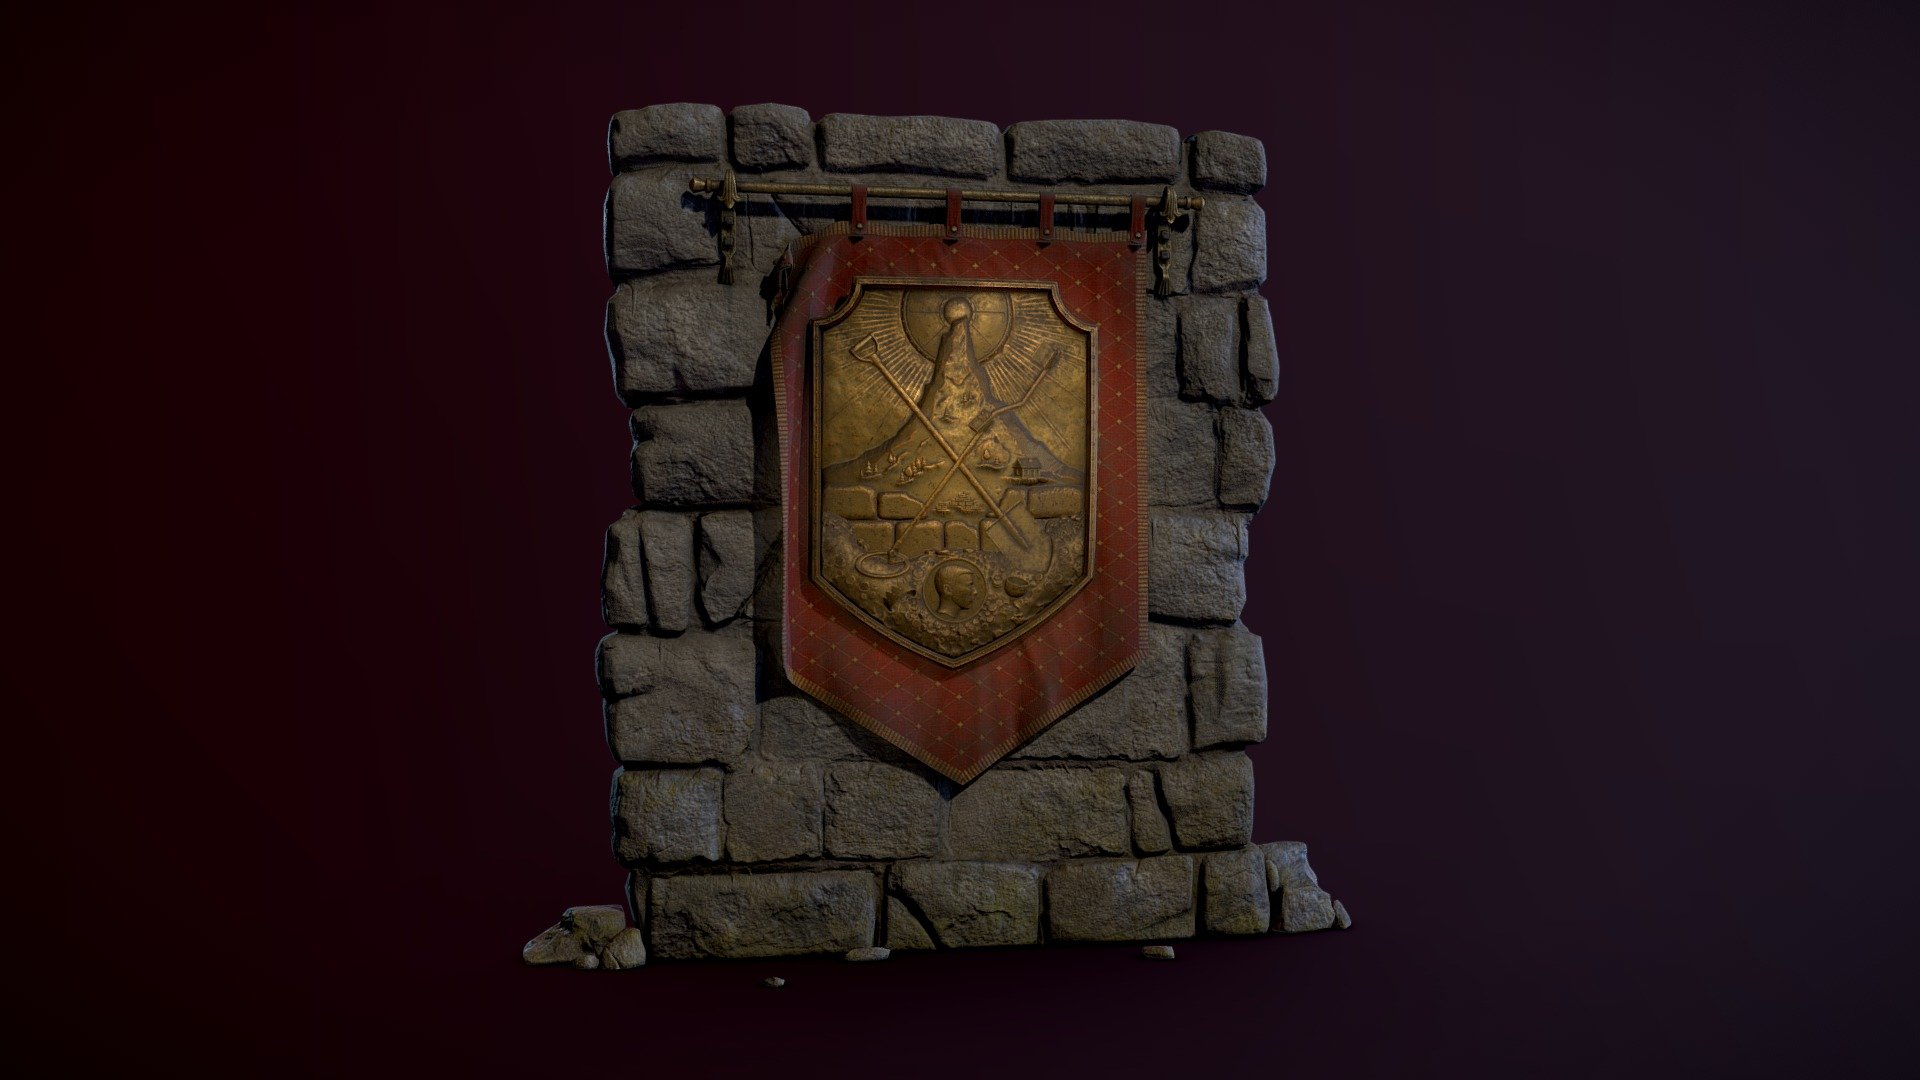 I developed this model from scratch for one game I worked on earlier.

For this project I used:

modo (modeling) - wall, metal crossbar and flag (fabric simulation)

3d Coat (sculpting) - coat of arms

Substance Painter - texturing - Family coat of arms - 3D model by Pavel Egorov (@Pavel.Egorov) 3d model